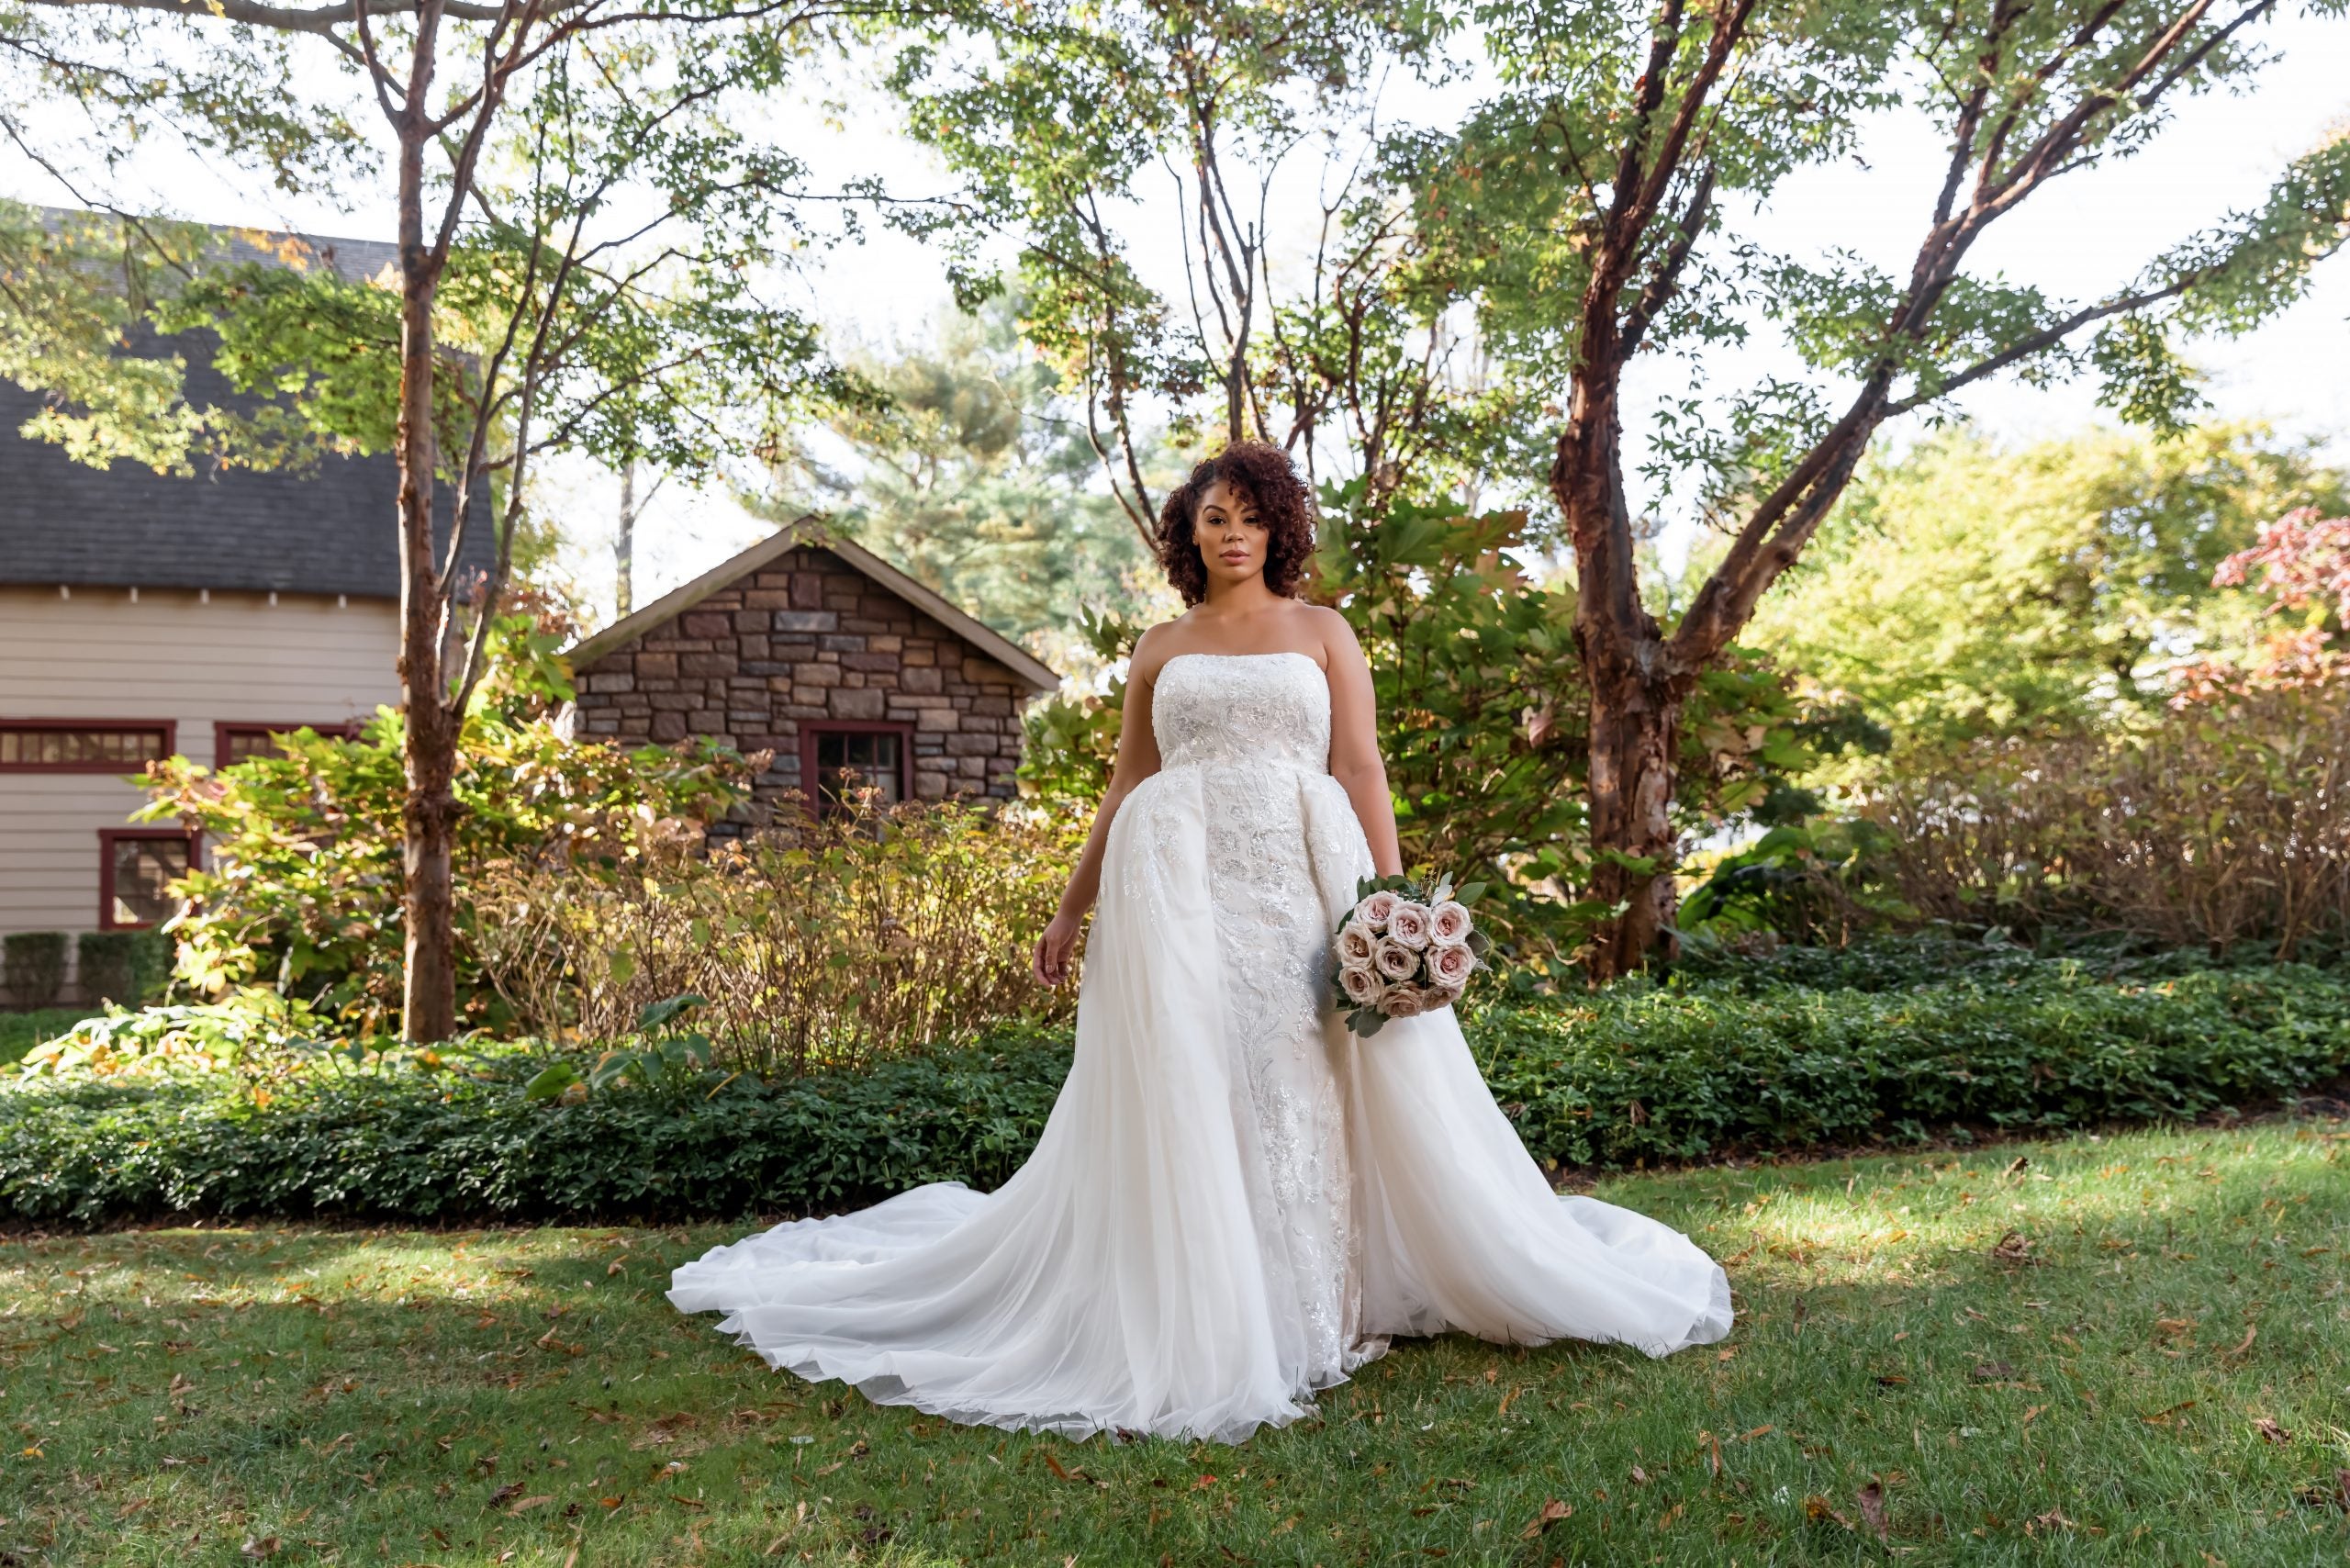 How to Shop for a Size Inclusive Wedding Dress